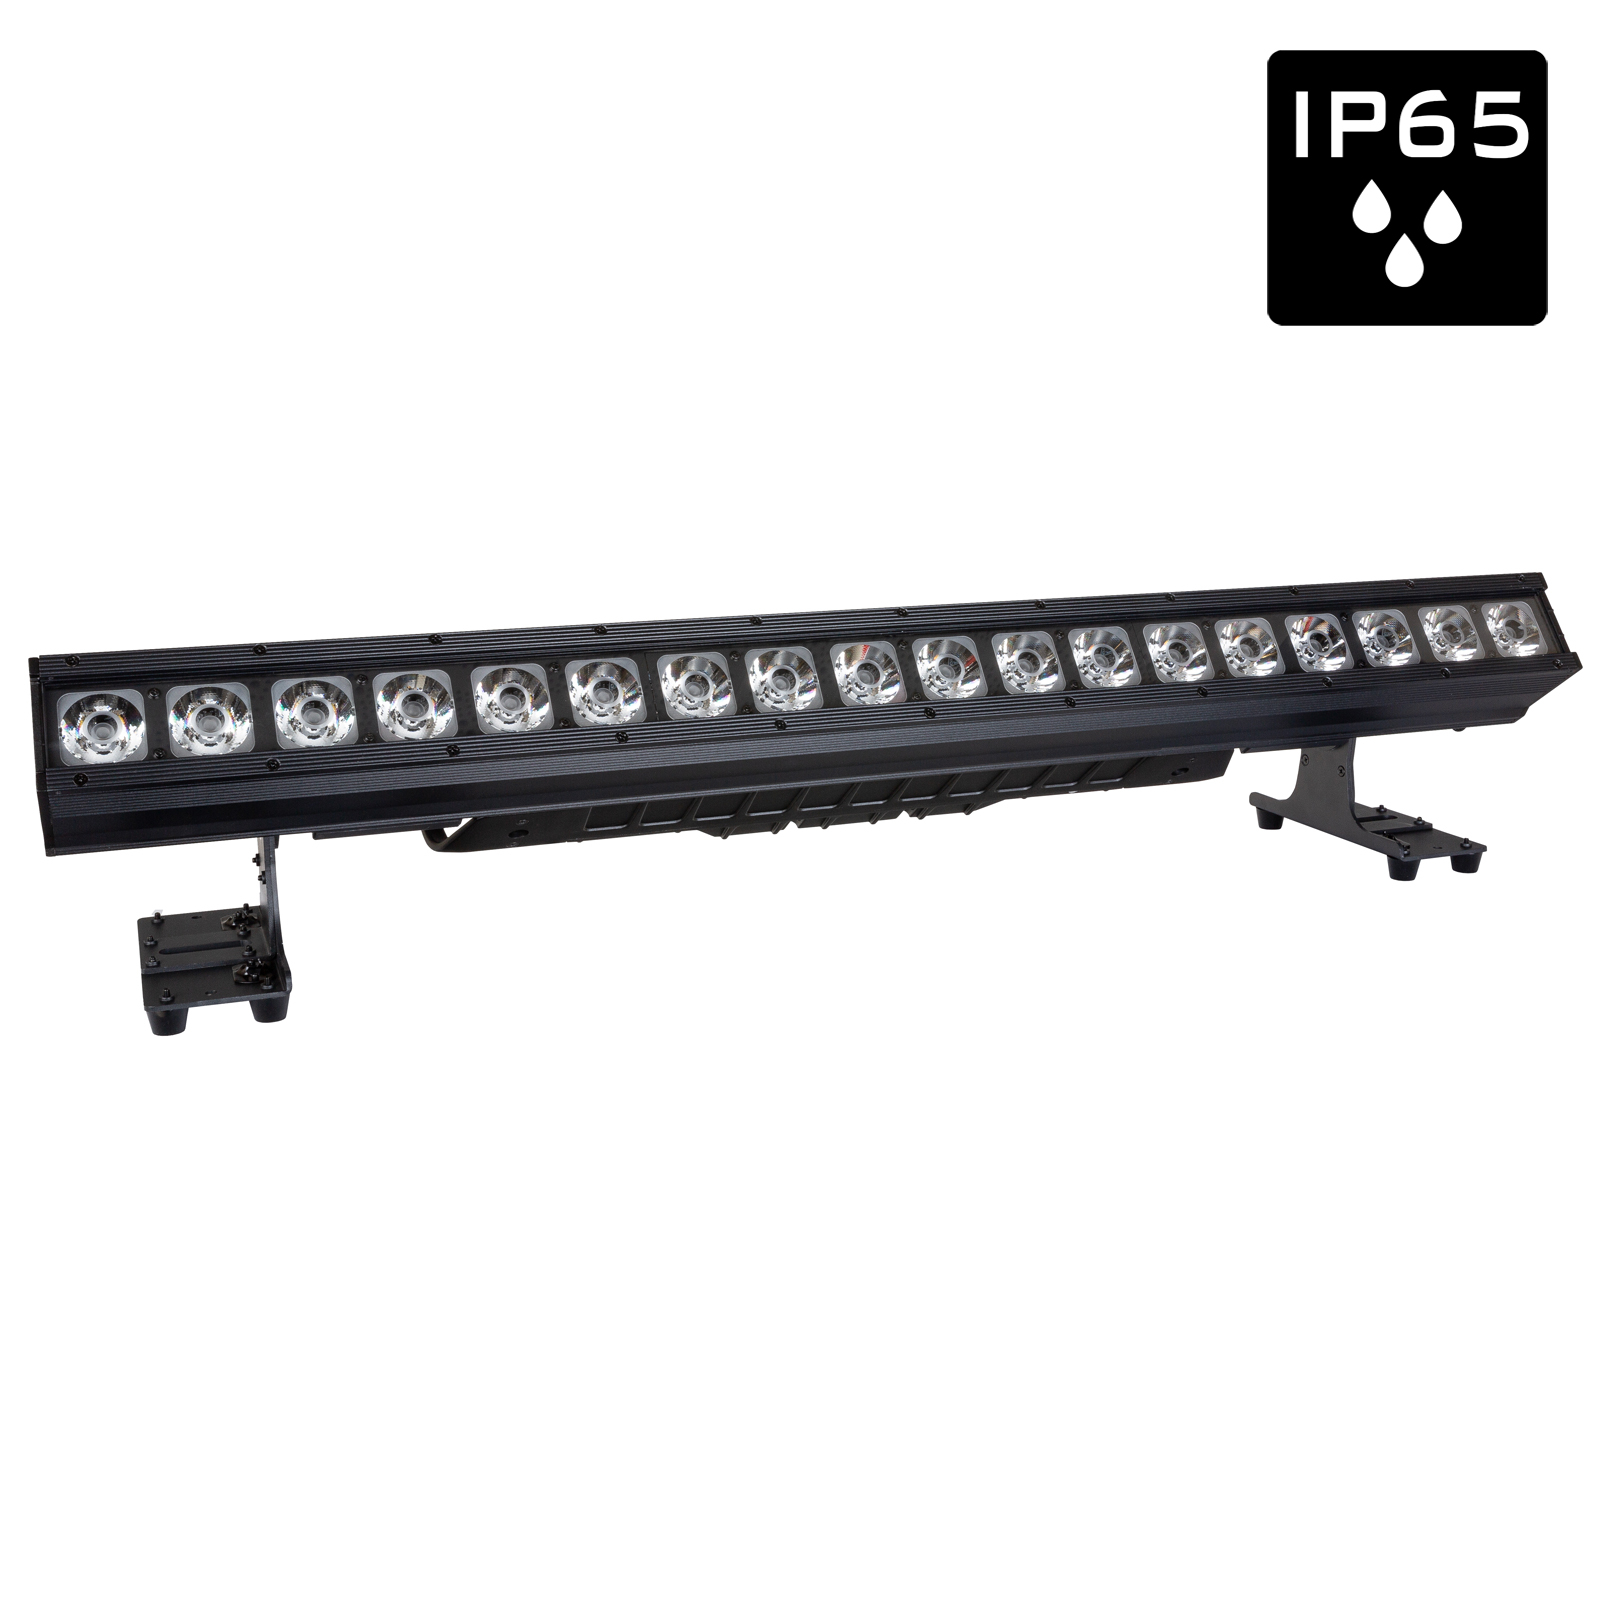 A versatile outdoor 1m long LED Pixel mapping bar, excellent for many rental jobs, TV-studios, concert stages, discotheques and many more...